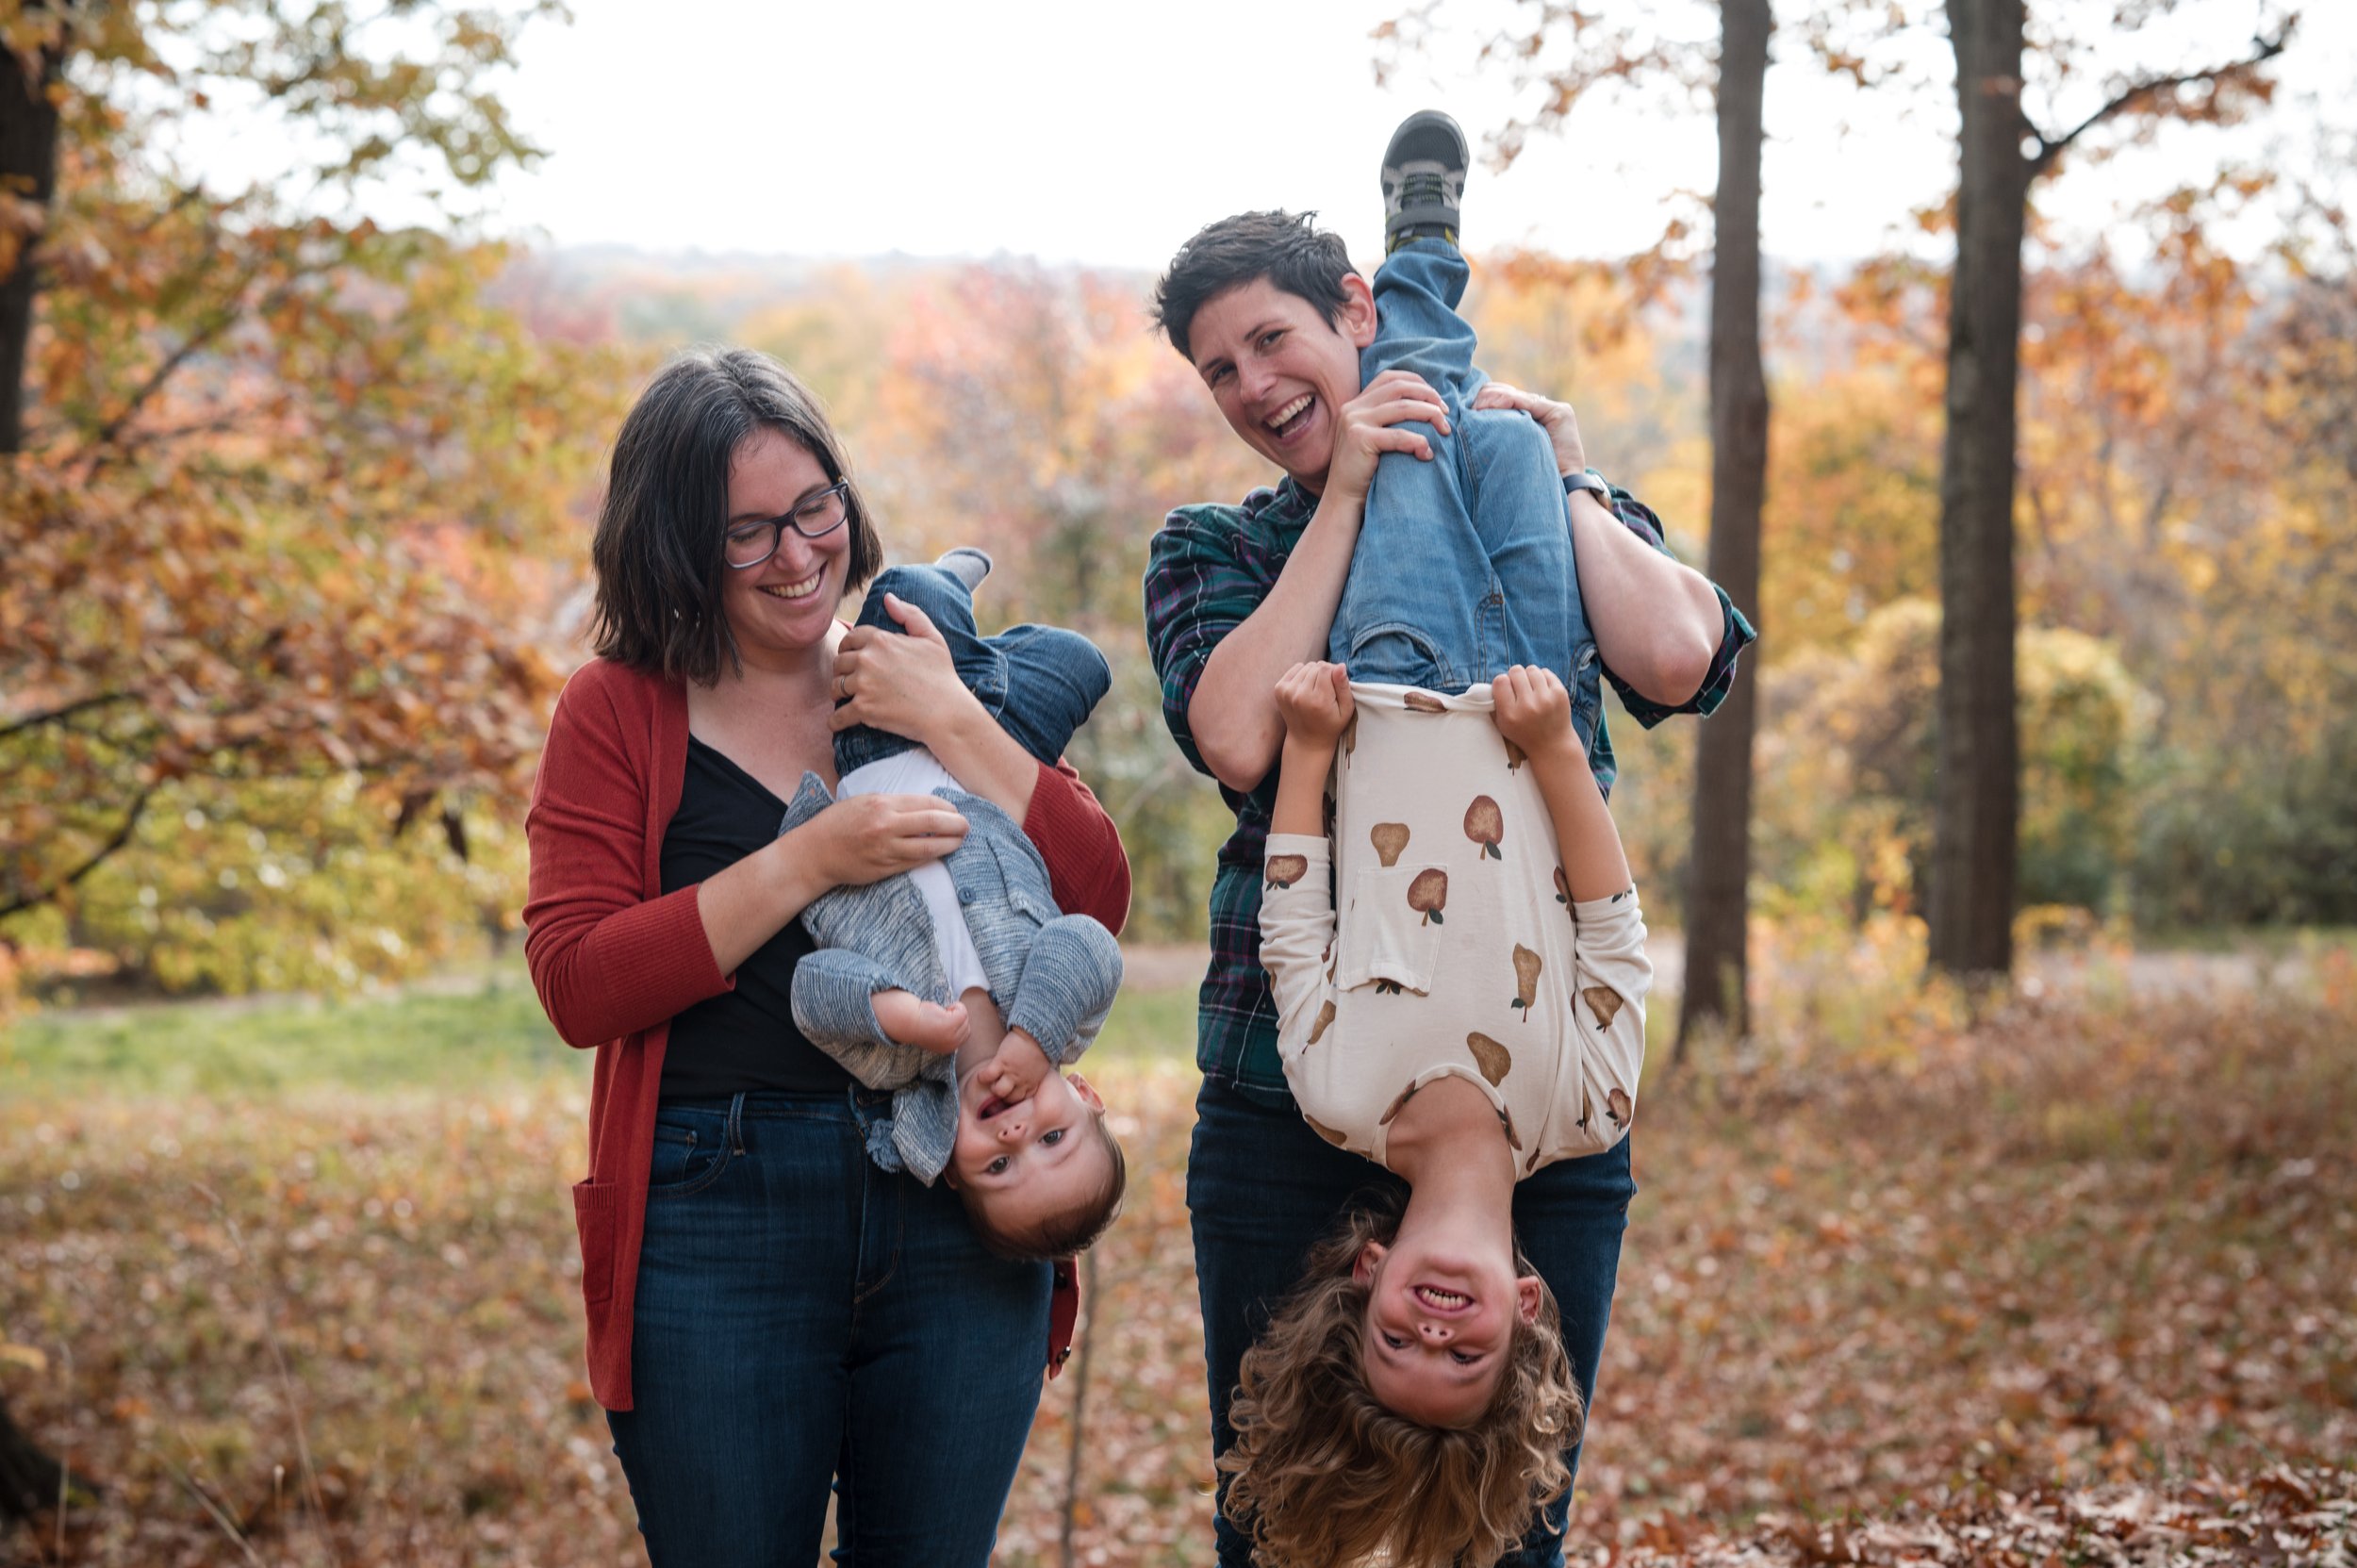 queer parents hold toddlers upside down in candid playful family photos in fall foliage by Michelle Schapiro Photography